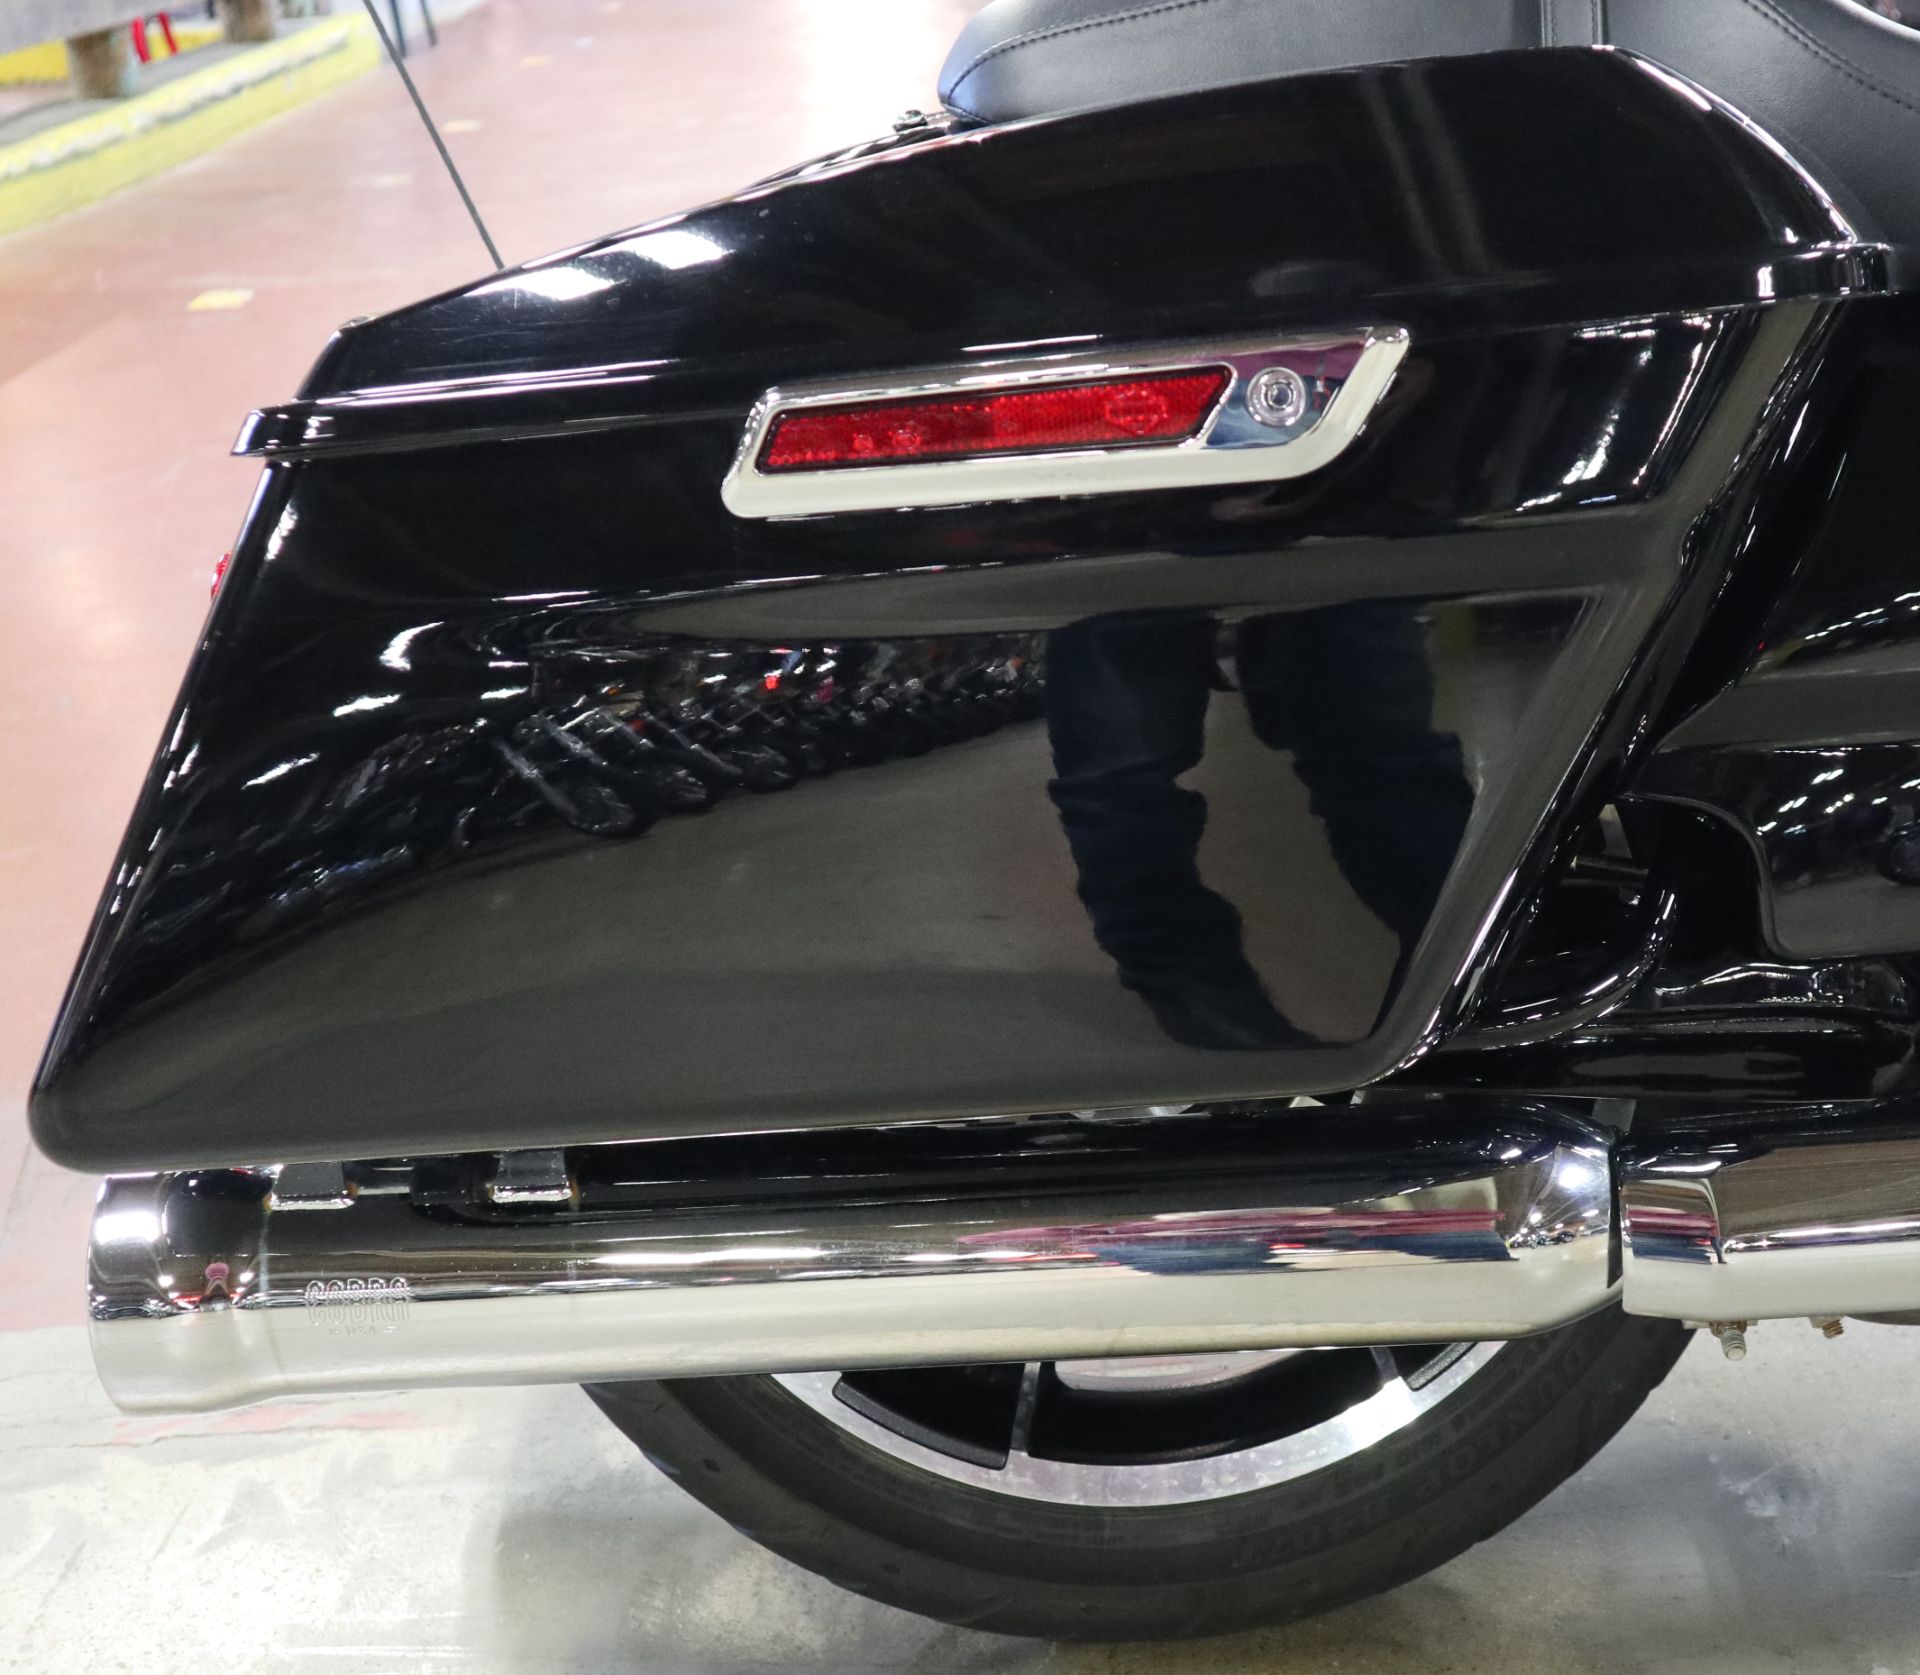 2021 Harley-Davidson Road Glide® in New London, Connecticut - Photo 12